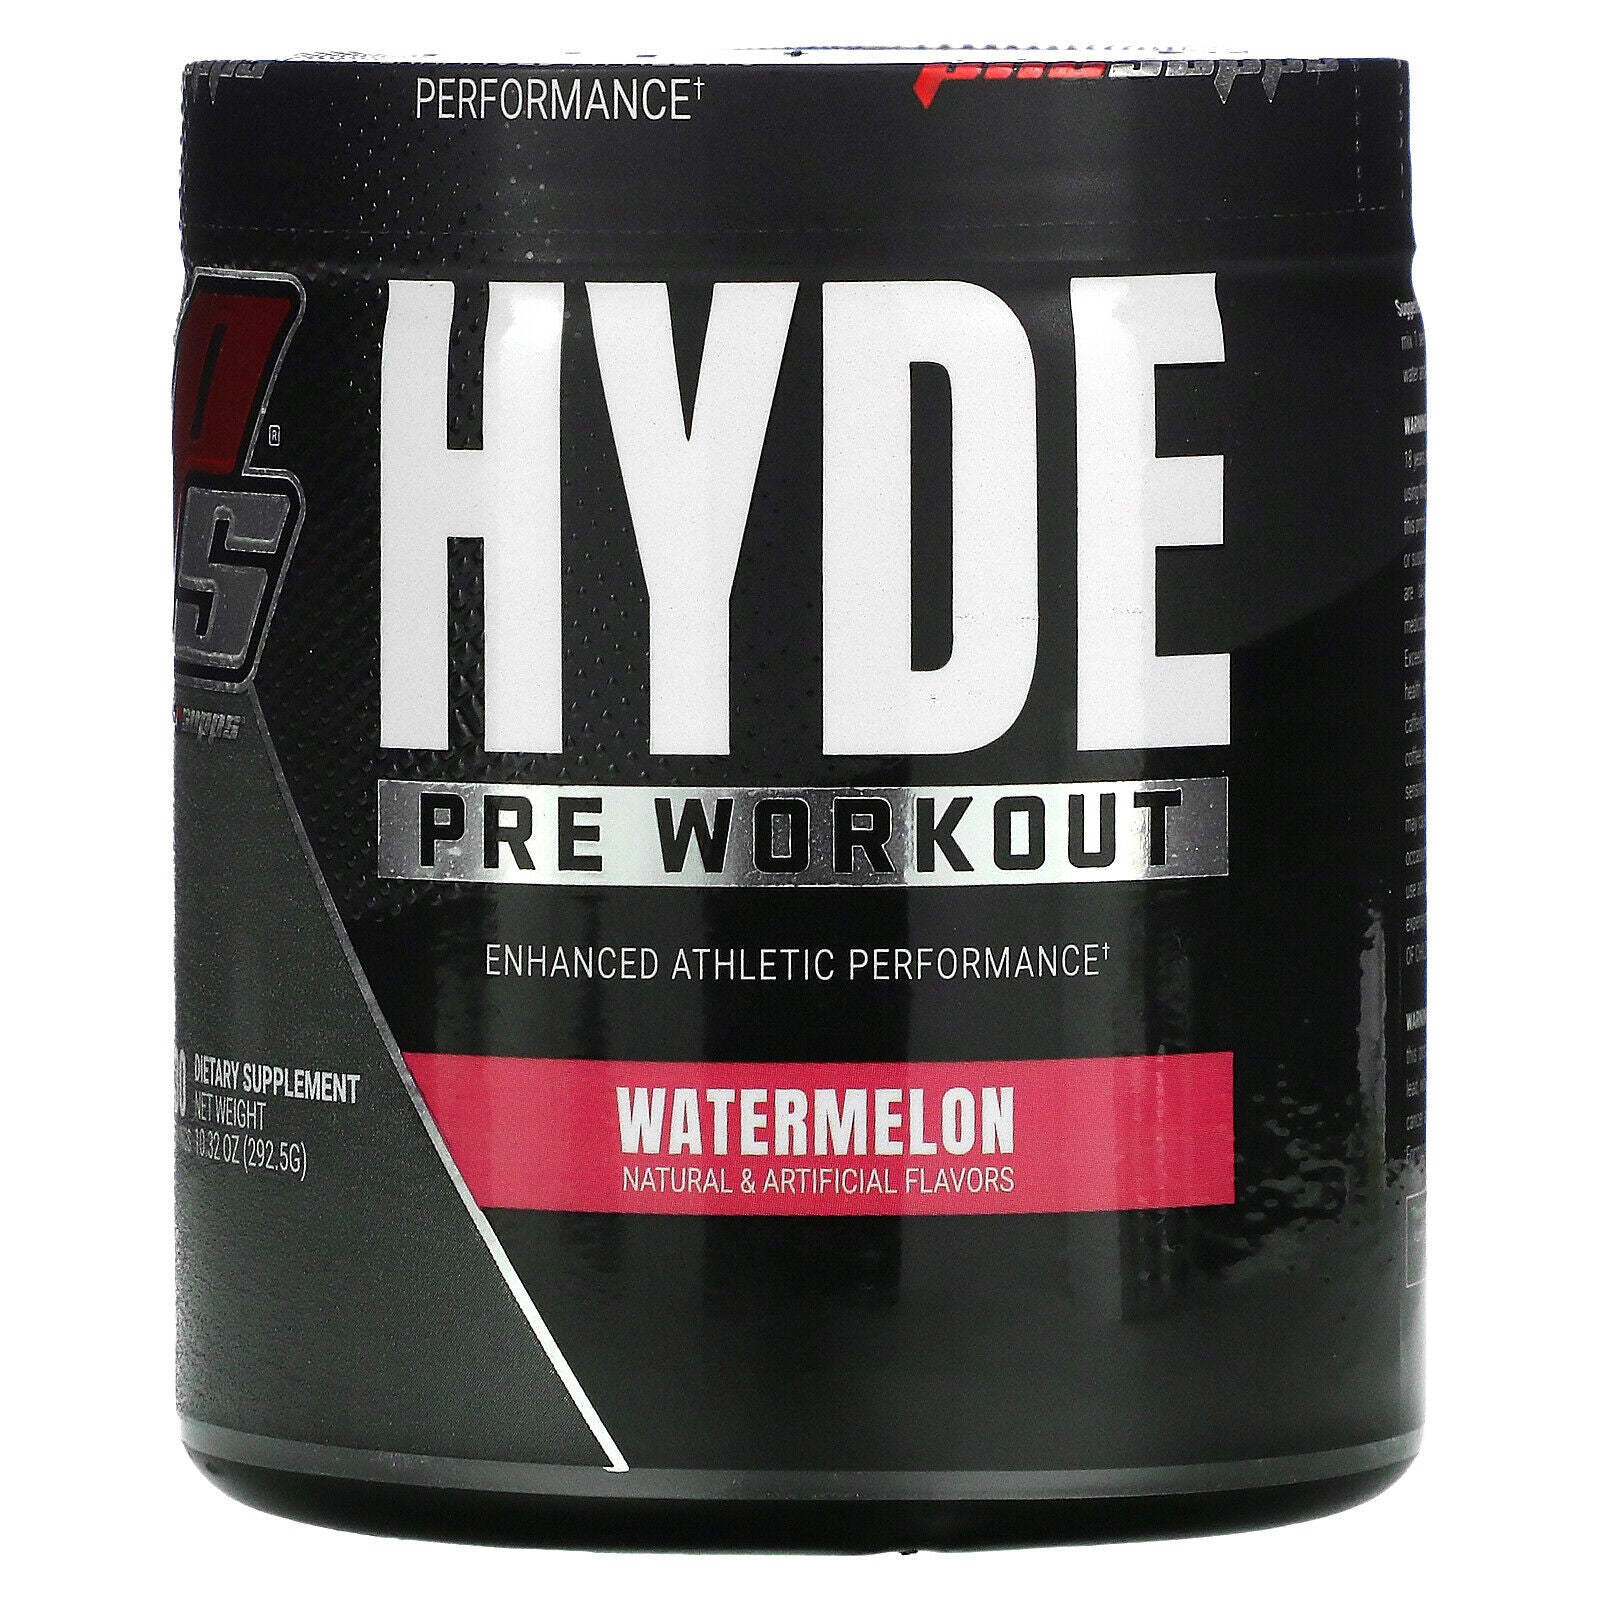 Prosupps Hyde Pre Workout, Watermelon, 30 Servings